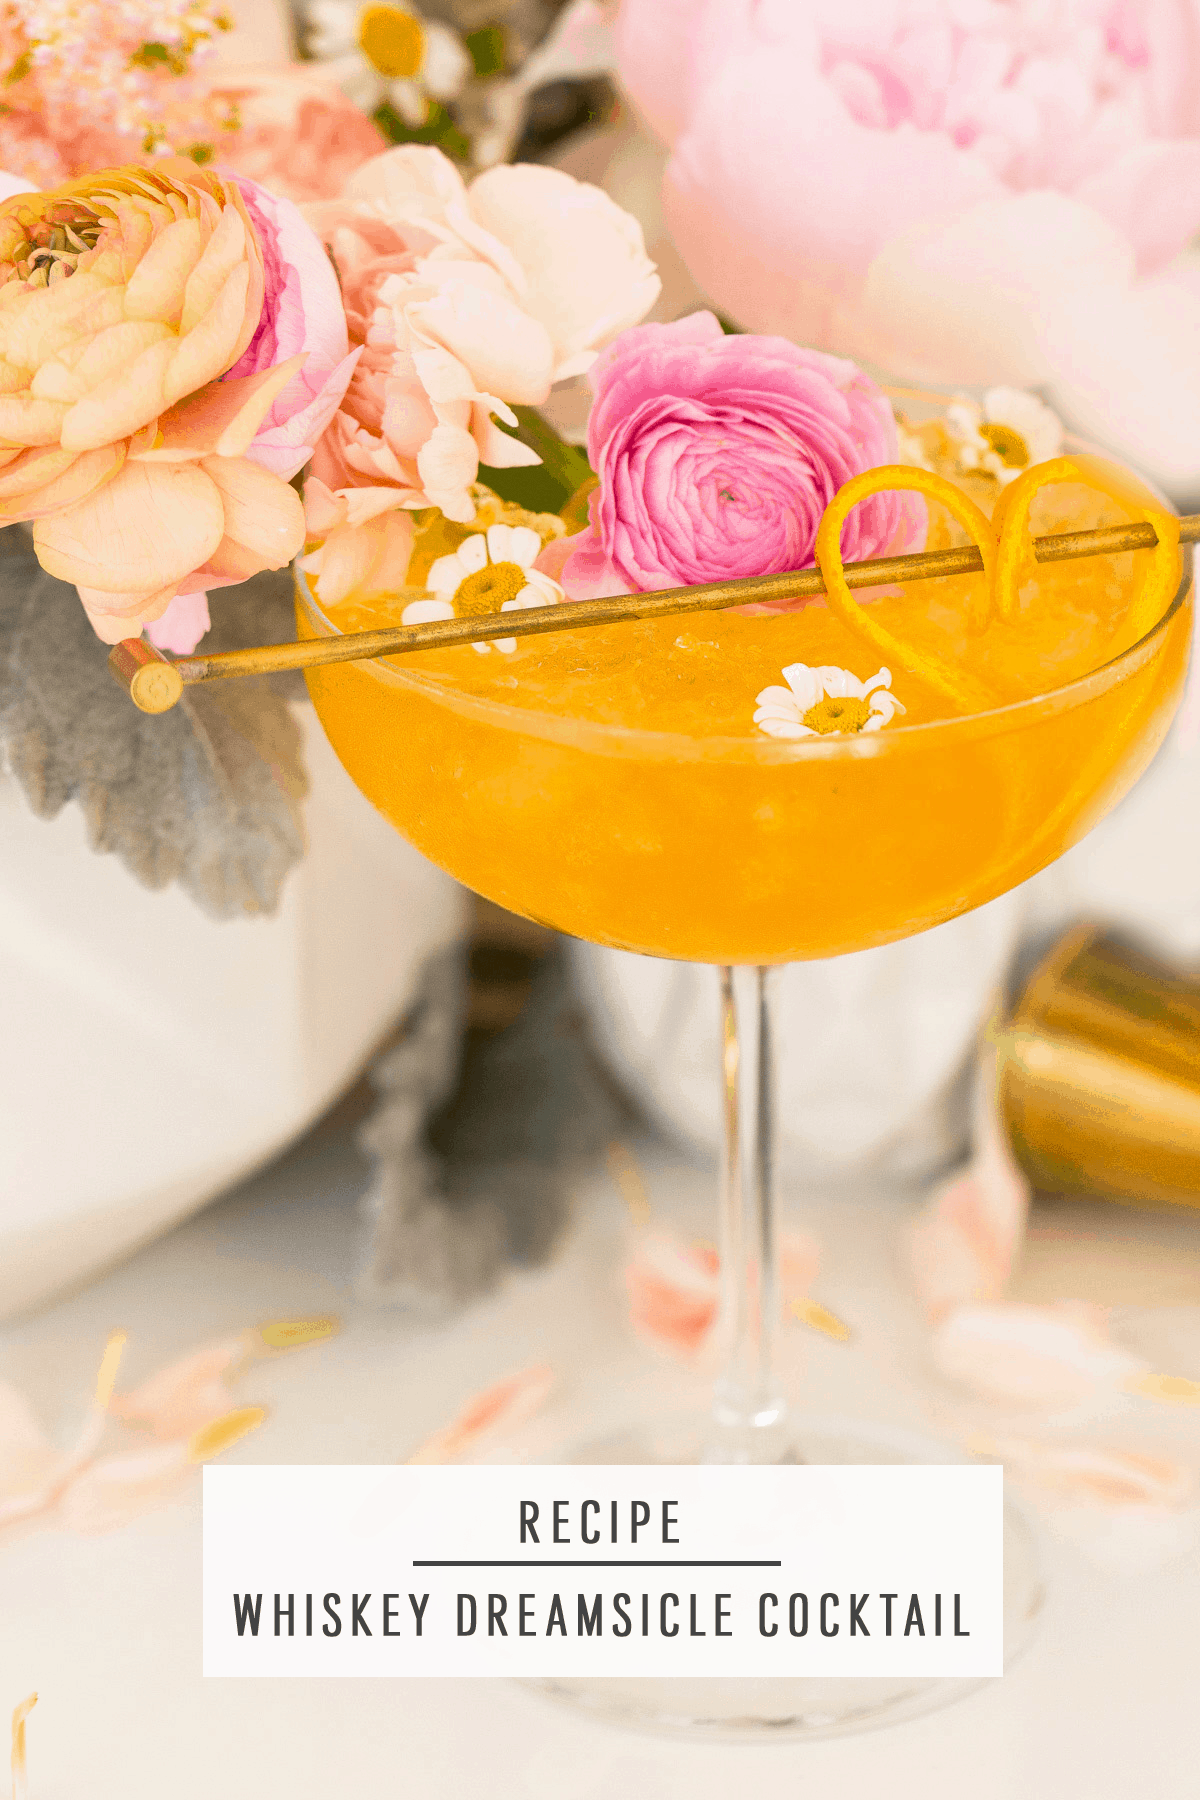 Whiskey Dreamcicle Cocktail Recipe by top Houston lifestyle blogger Ashley Rose of Sugar and Cloth